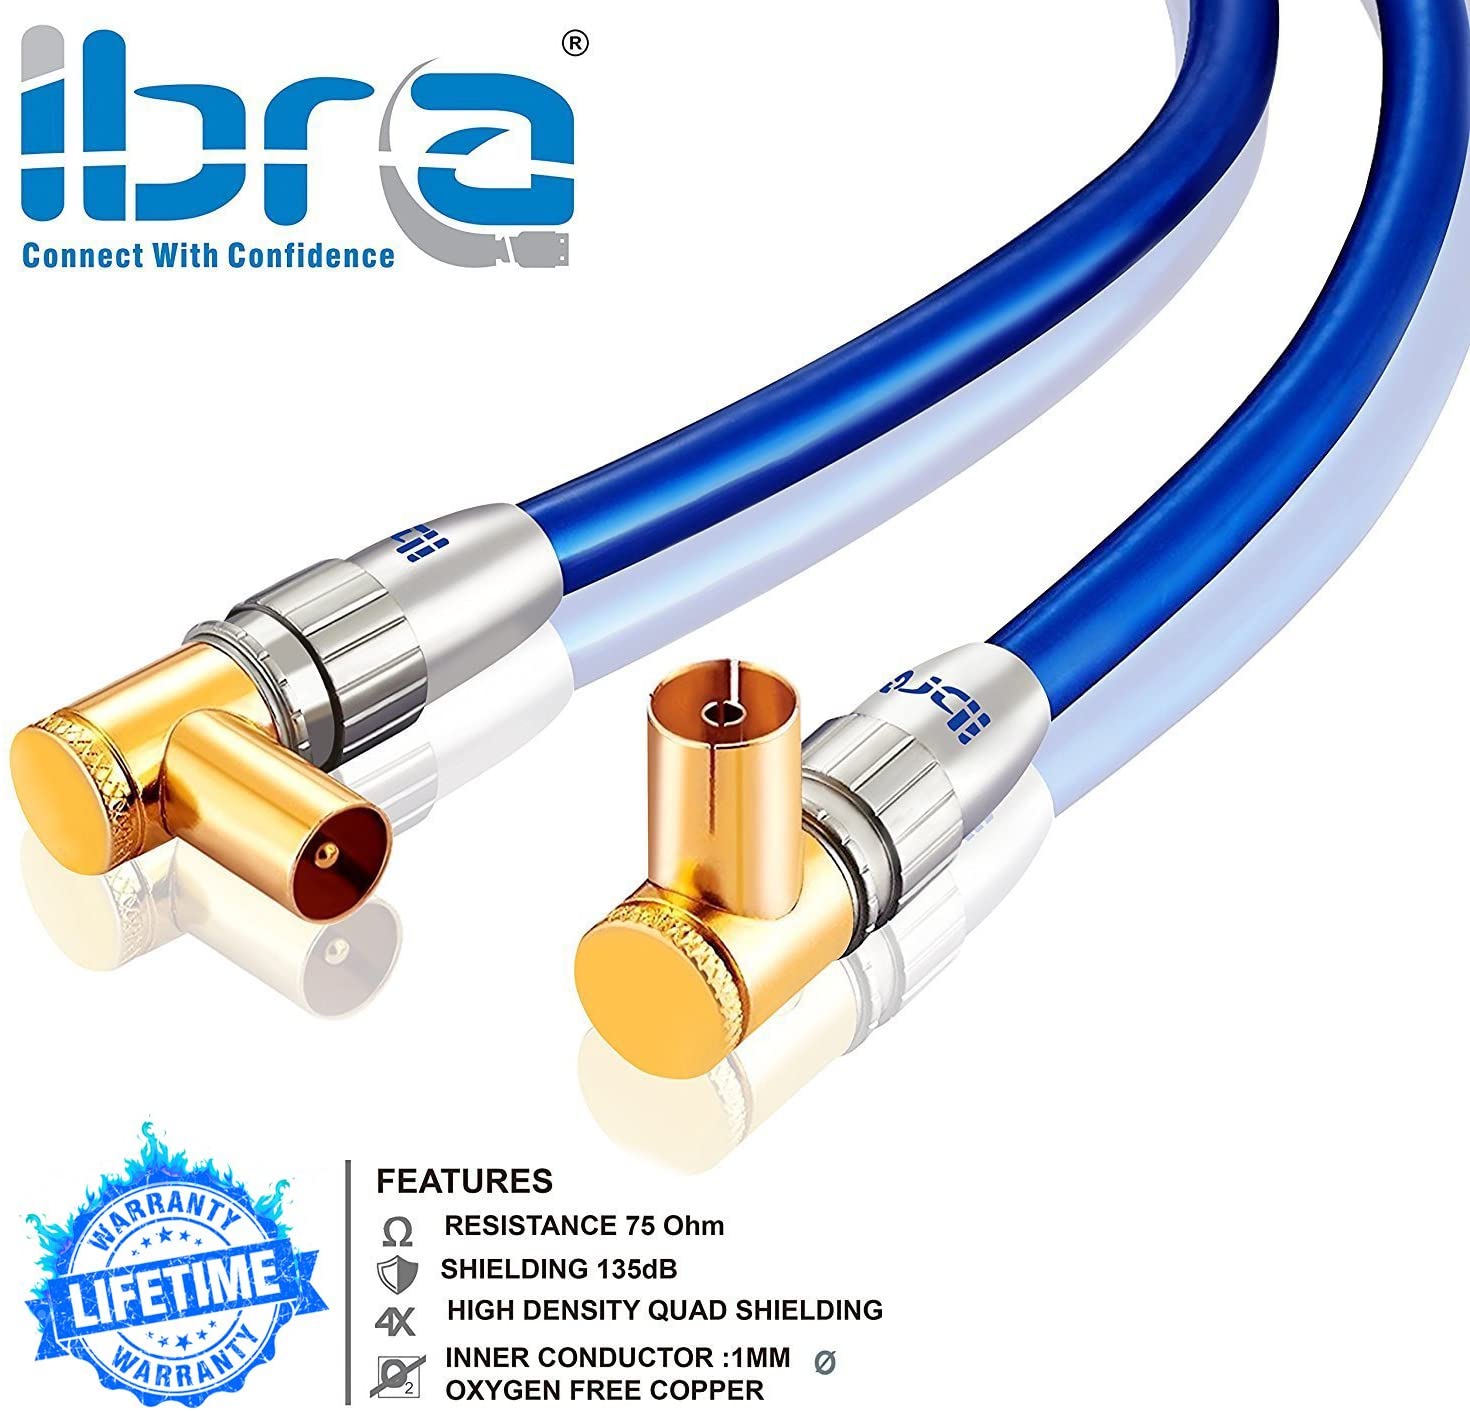 20m IBRA HDTV Antenna Cable | TV Aerial Cable with 90 Degree Right Angled Connectors | Premium Freeview Coaxial Cable | 90° Angled Connectors: Coax Male to Female |For UHV/UHF/RF DVB-T1/T2